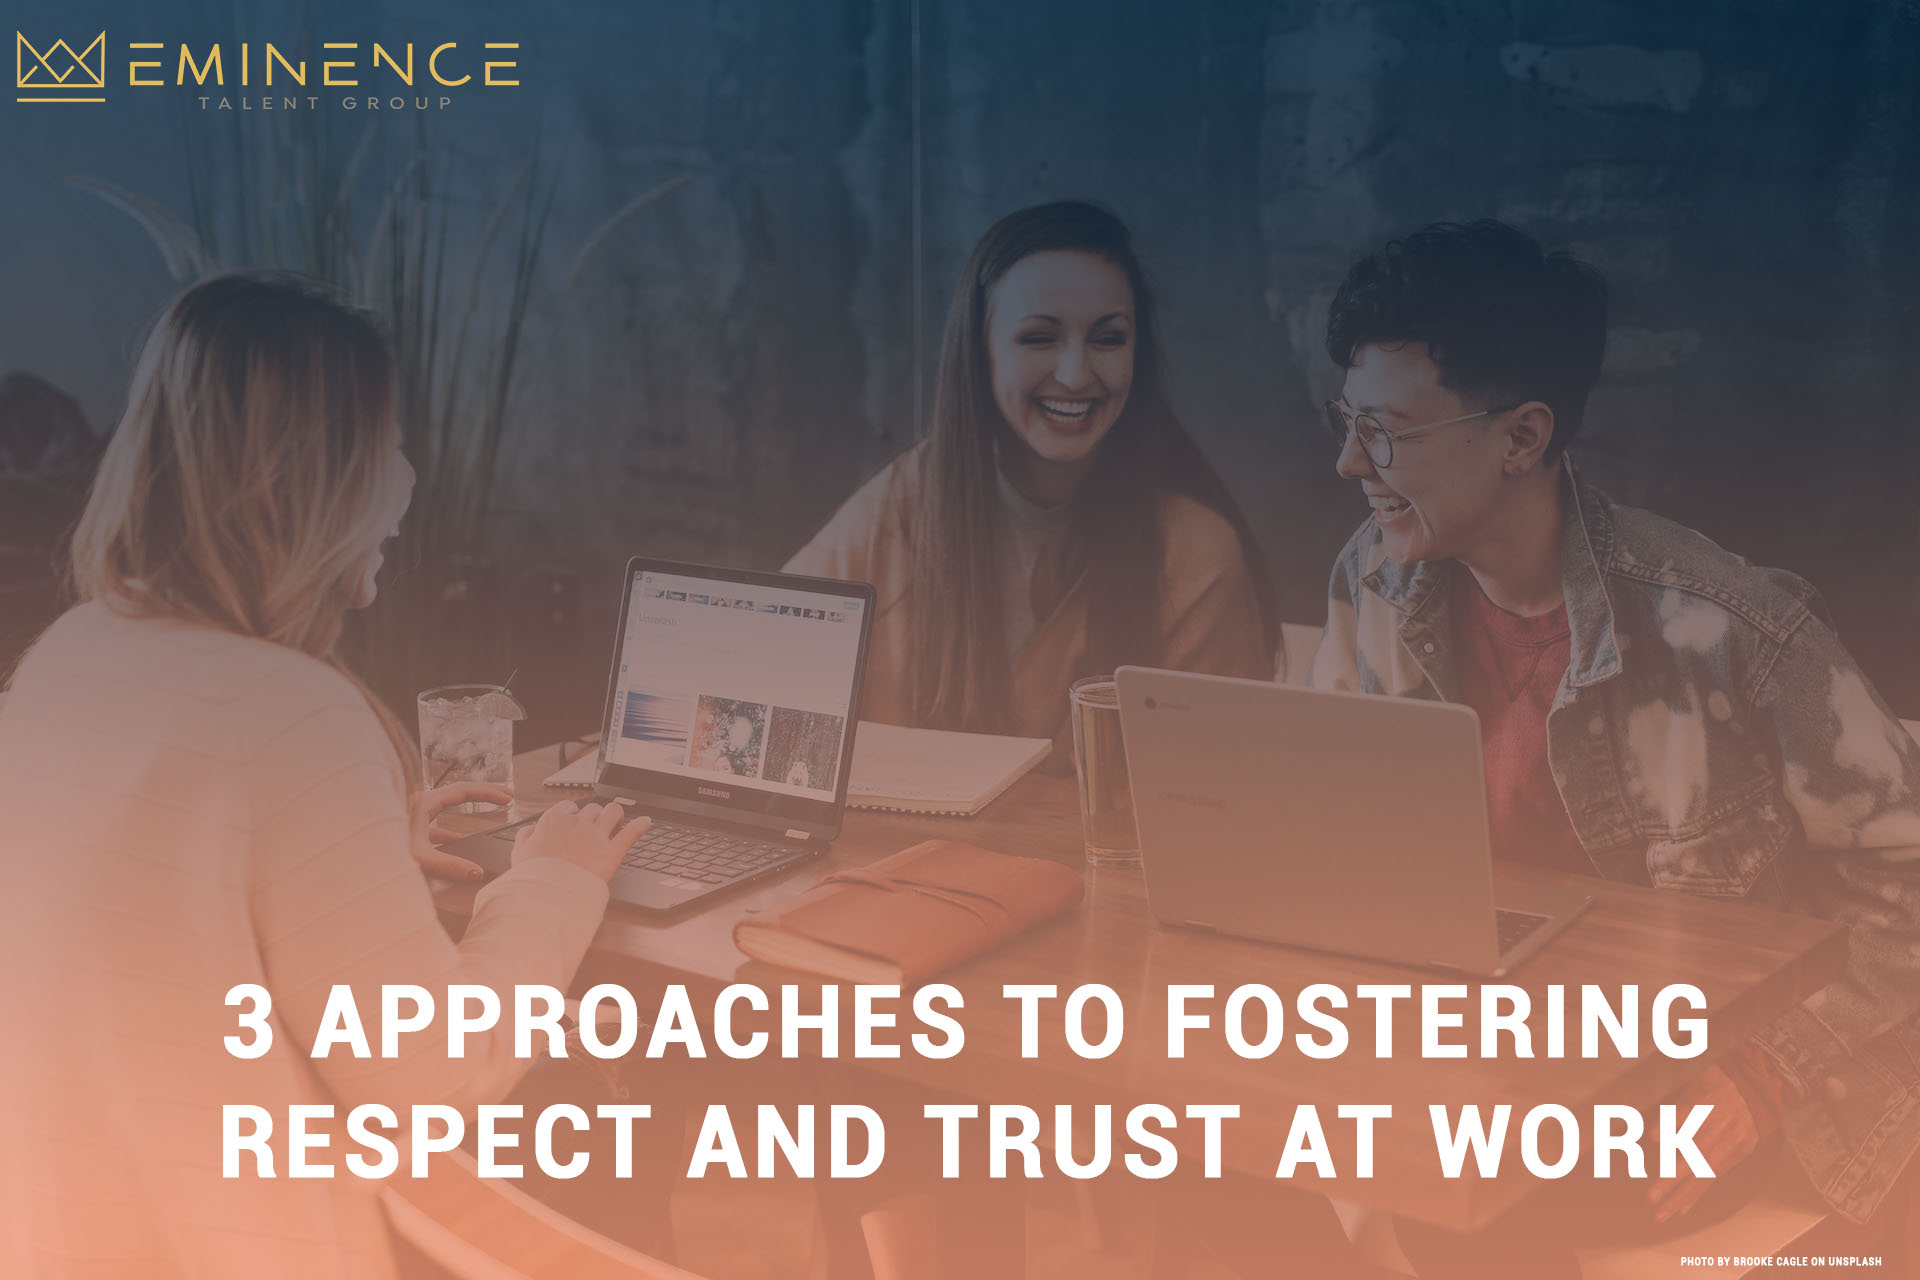 3 approaches to fostering respect and trust at work